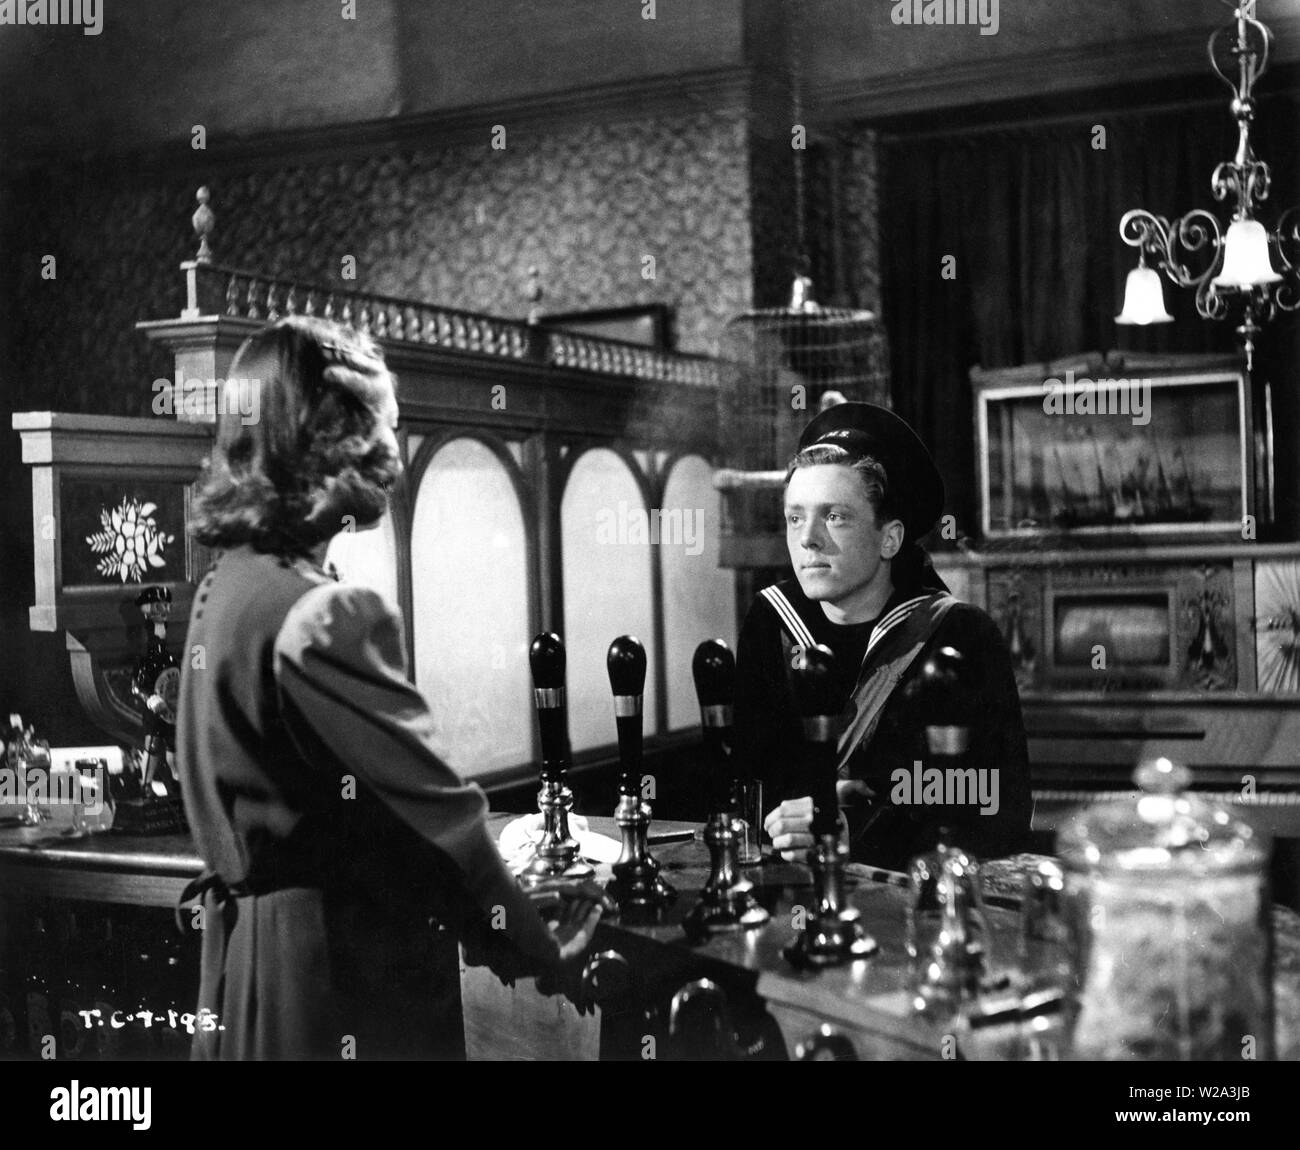 Richard Attenborough and Kay Young in IN WHICH WE SERVE 1942 directors Noel Coward and David Lean writer Noel Coward photographed by Ronald Neame producers Two Cities Films / The London Symphony Orchestra (LSO) / British Lion Film Corporation Ltd Stock Photo